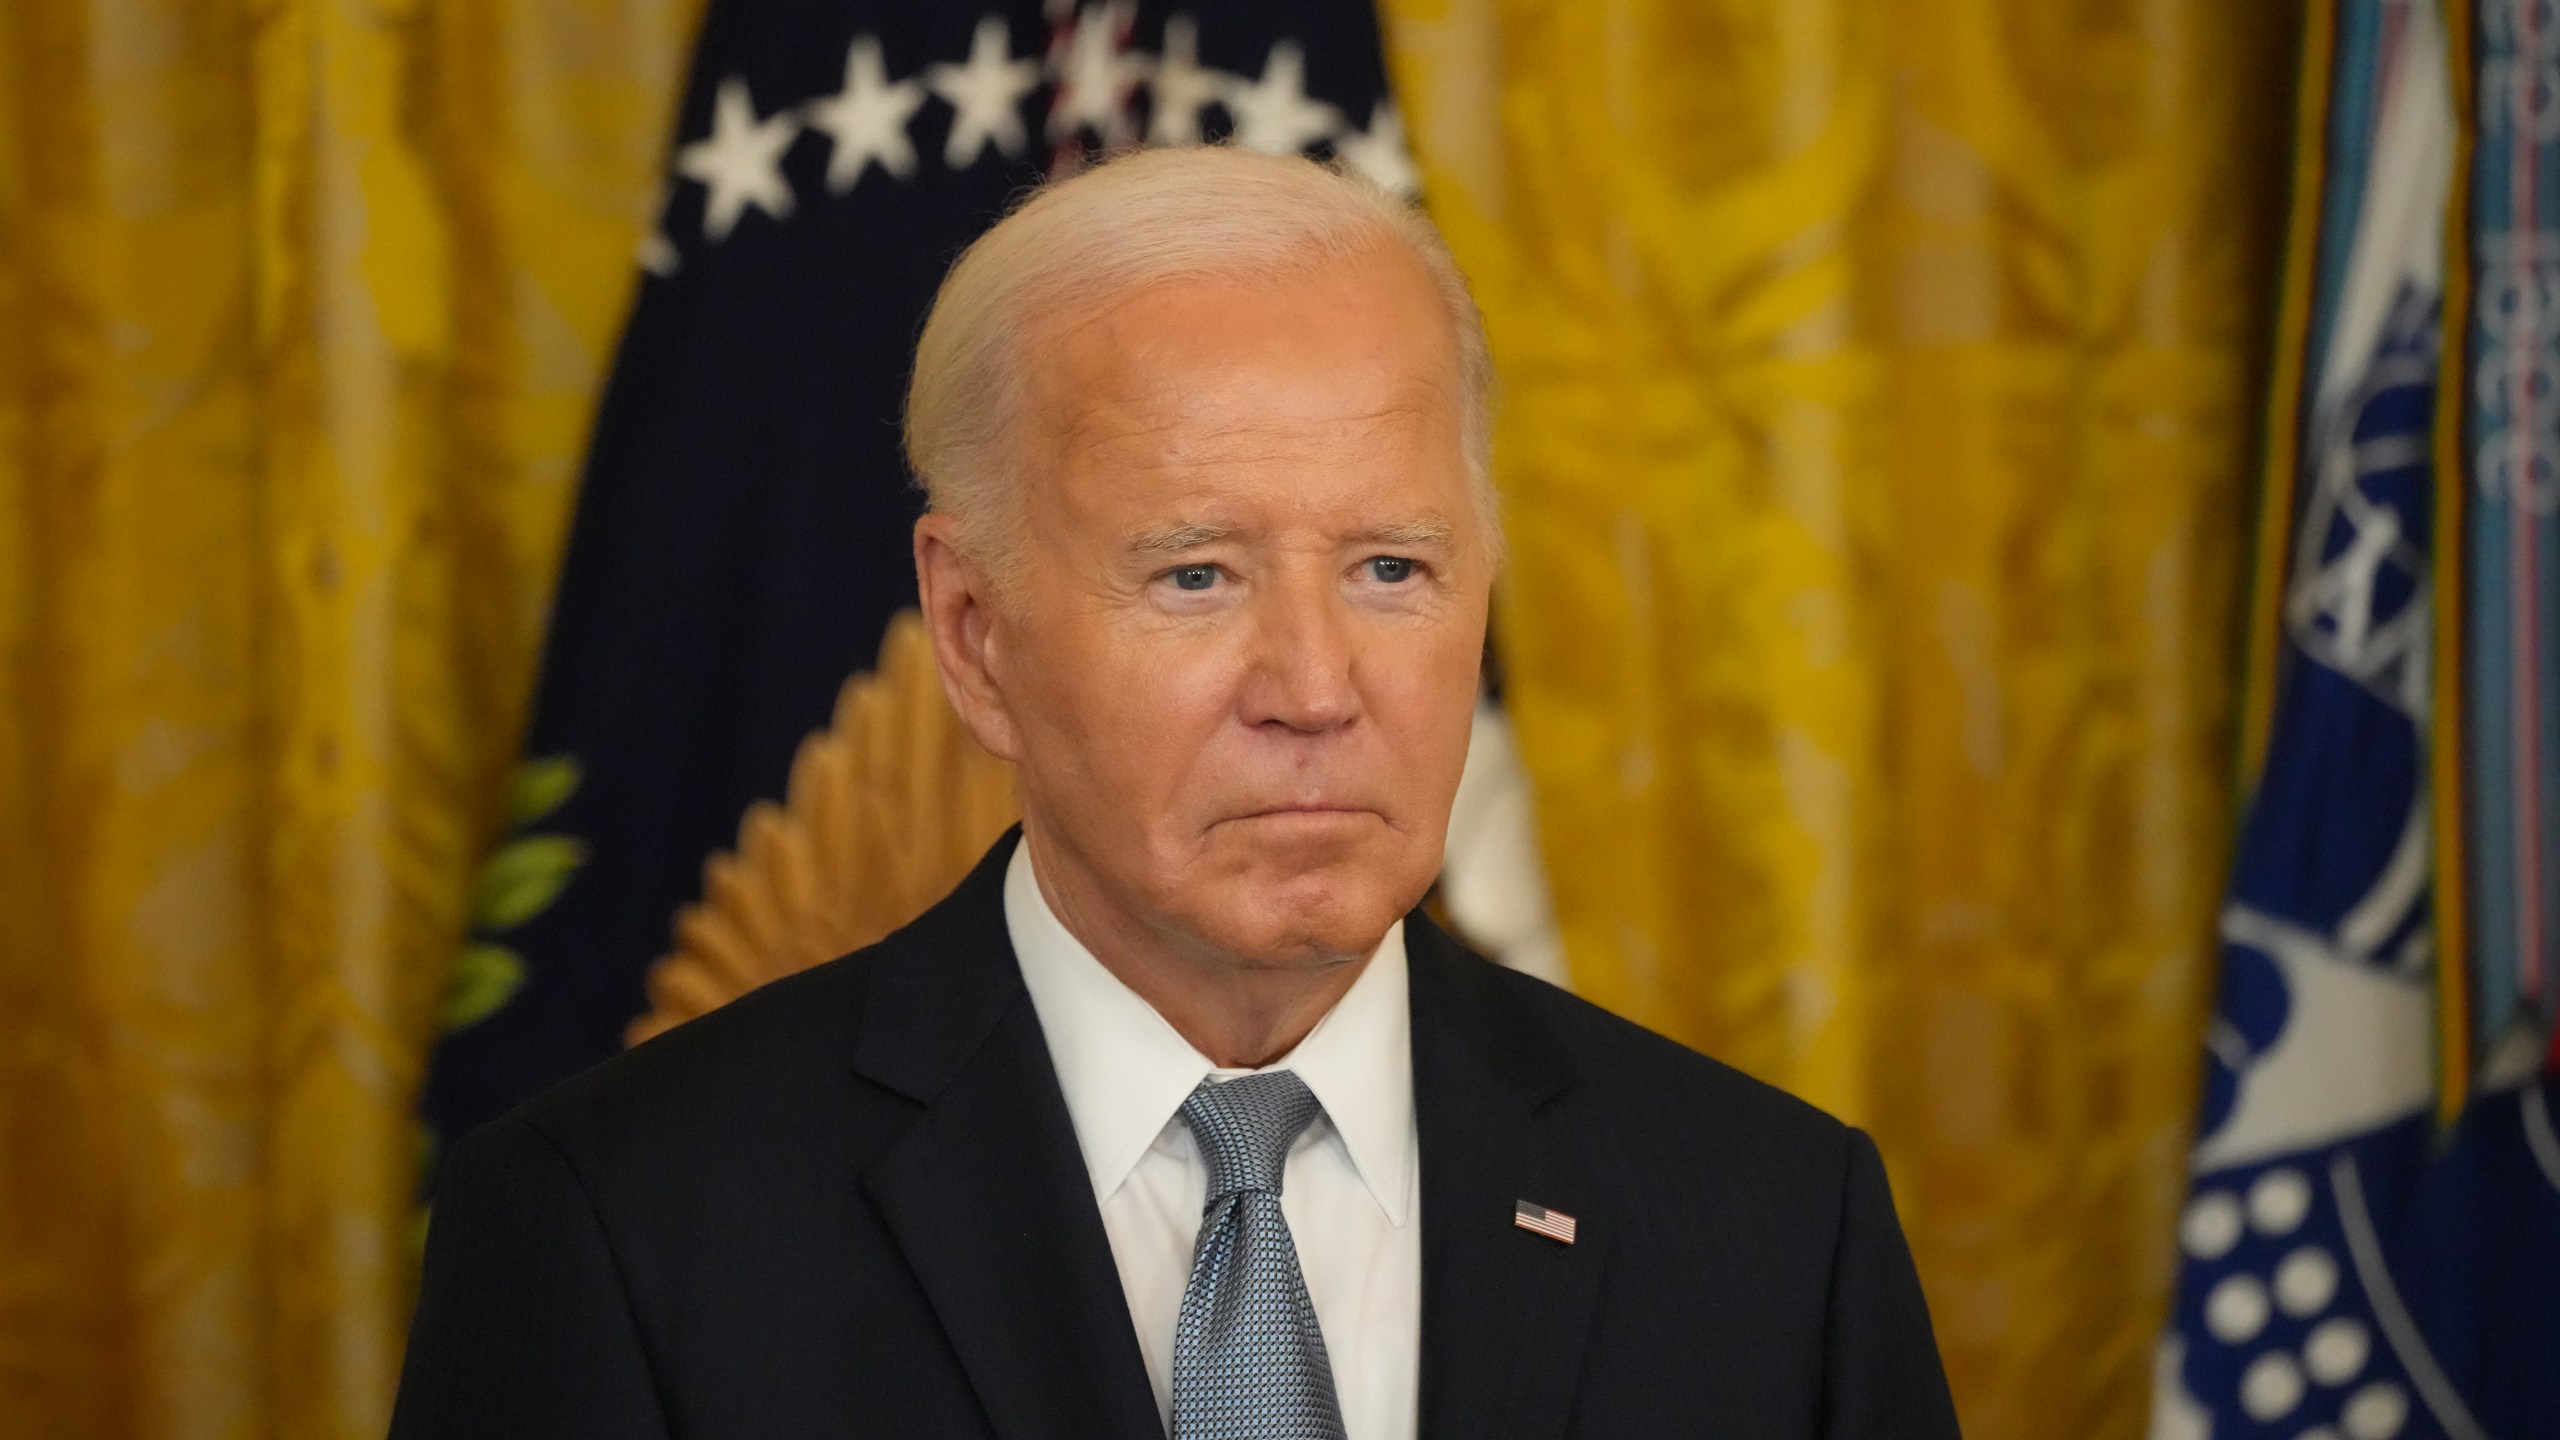 President Biden is under pressure to drop out of 2024 Presidential election